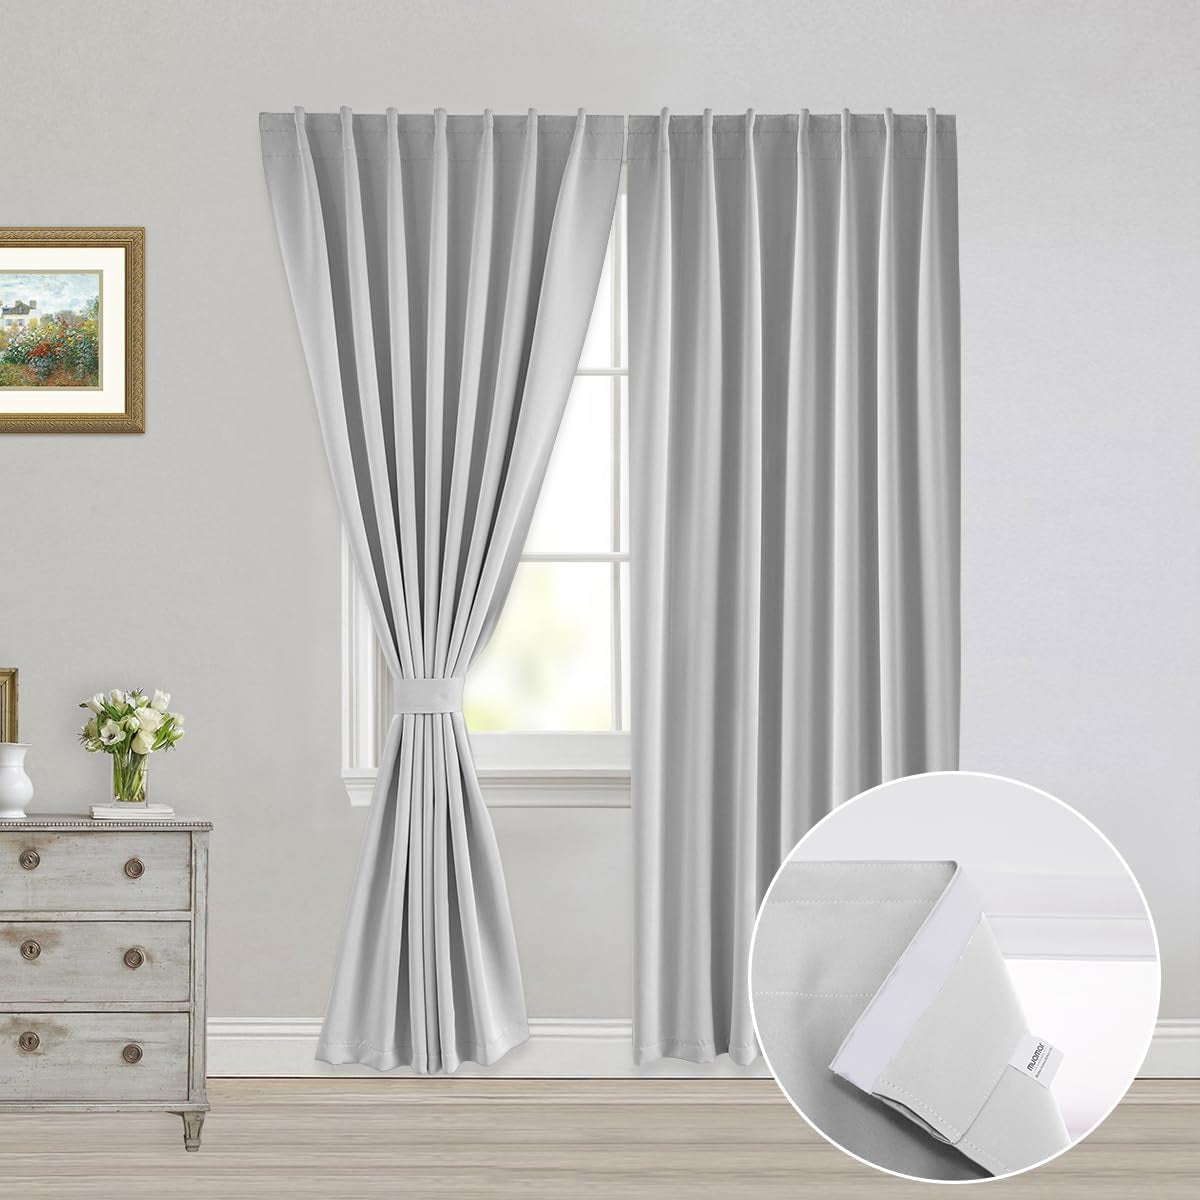 Muamar 2Pcs Blackout Curtains Privacy Curtains 63 Inch Length Window Curtains,Easy Install Thermal Insulated Window Shades,Stick Curtains No Rods, Black 42" W X 63" L  Muamar White 42"W X 84"L 